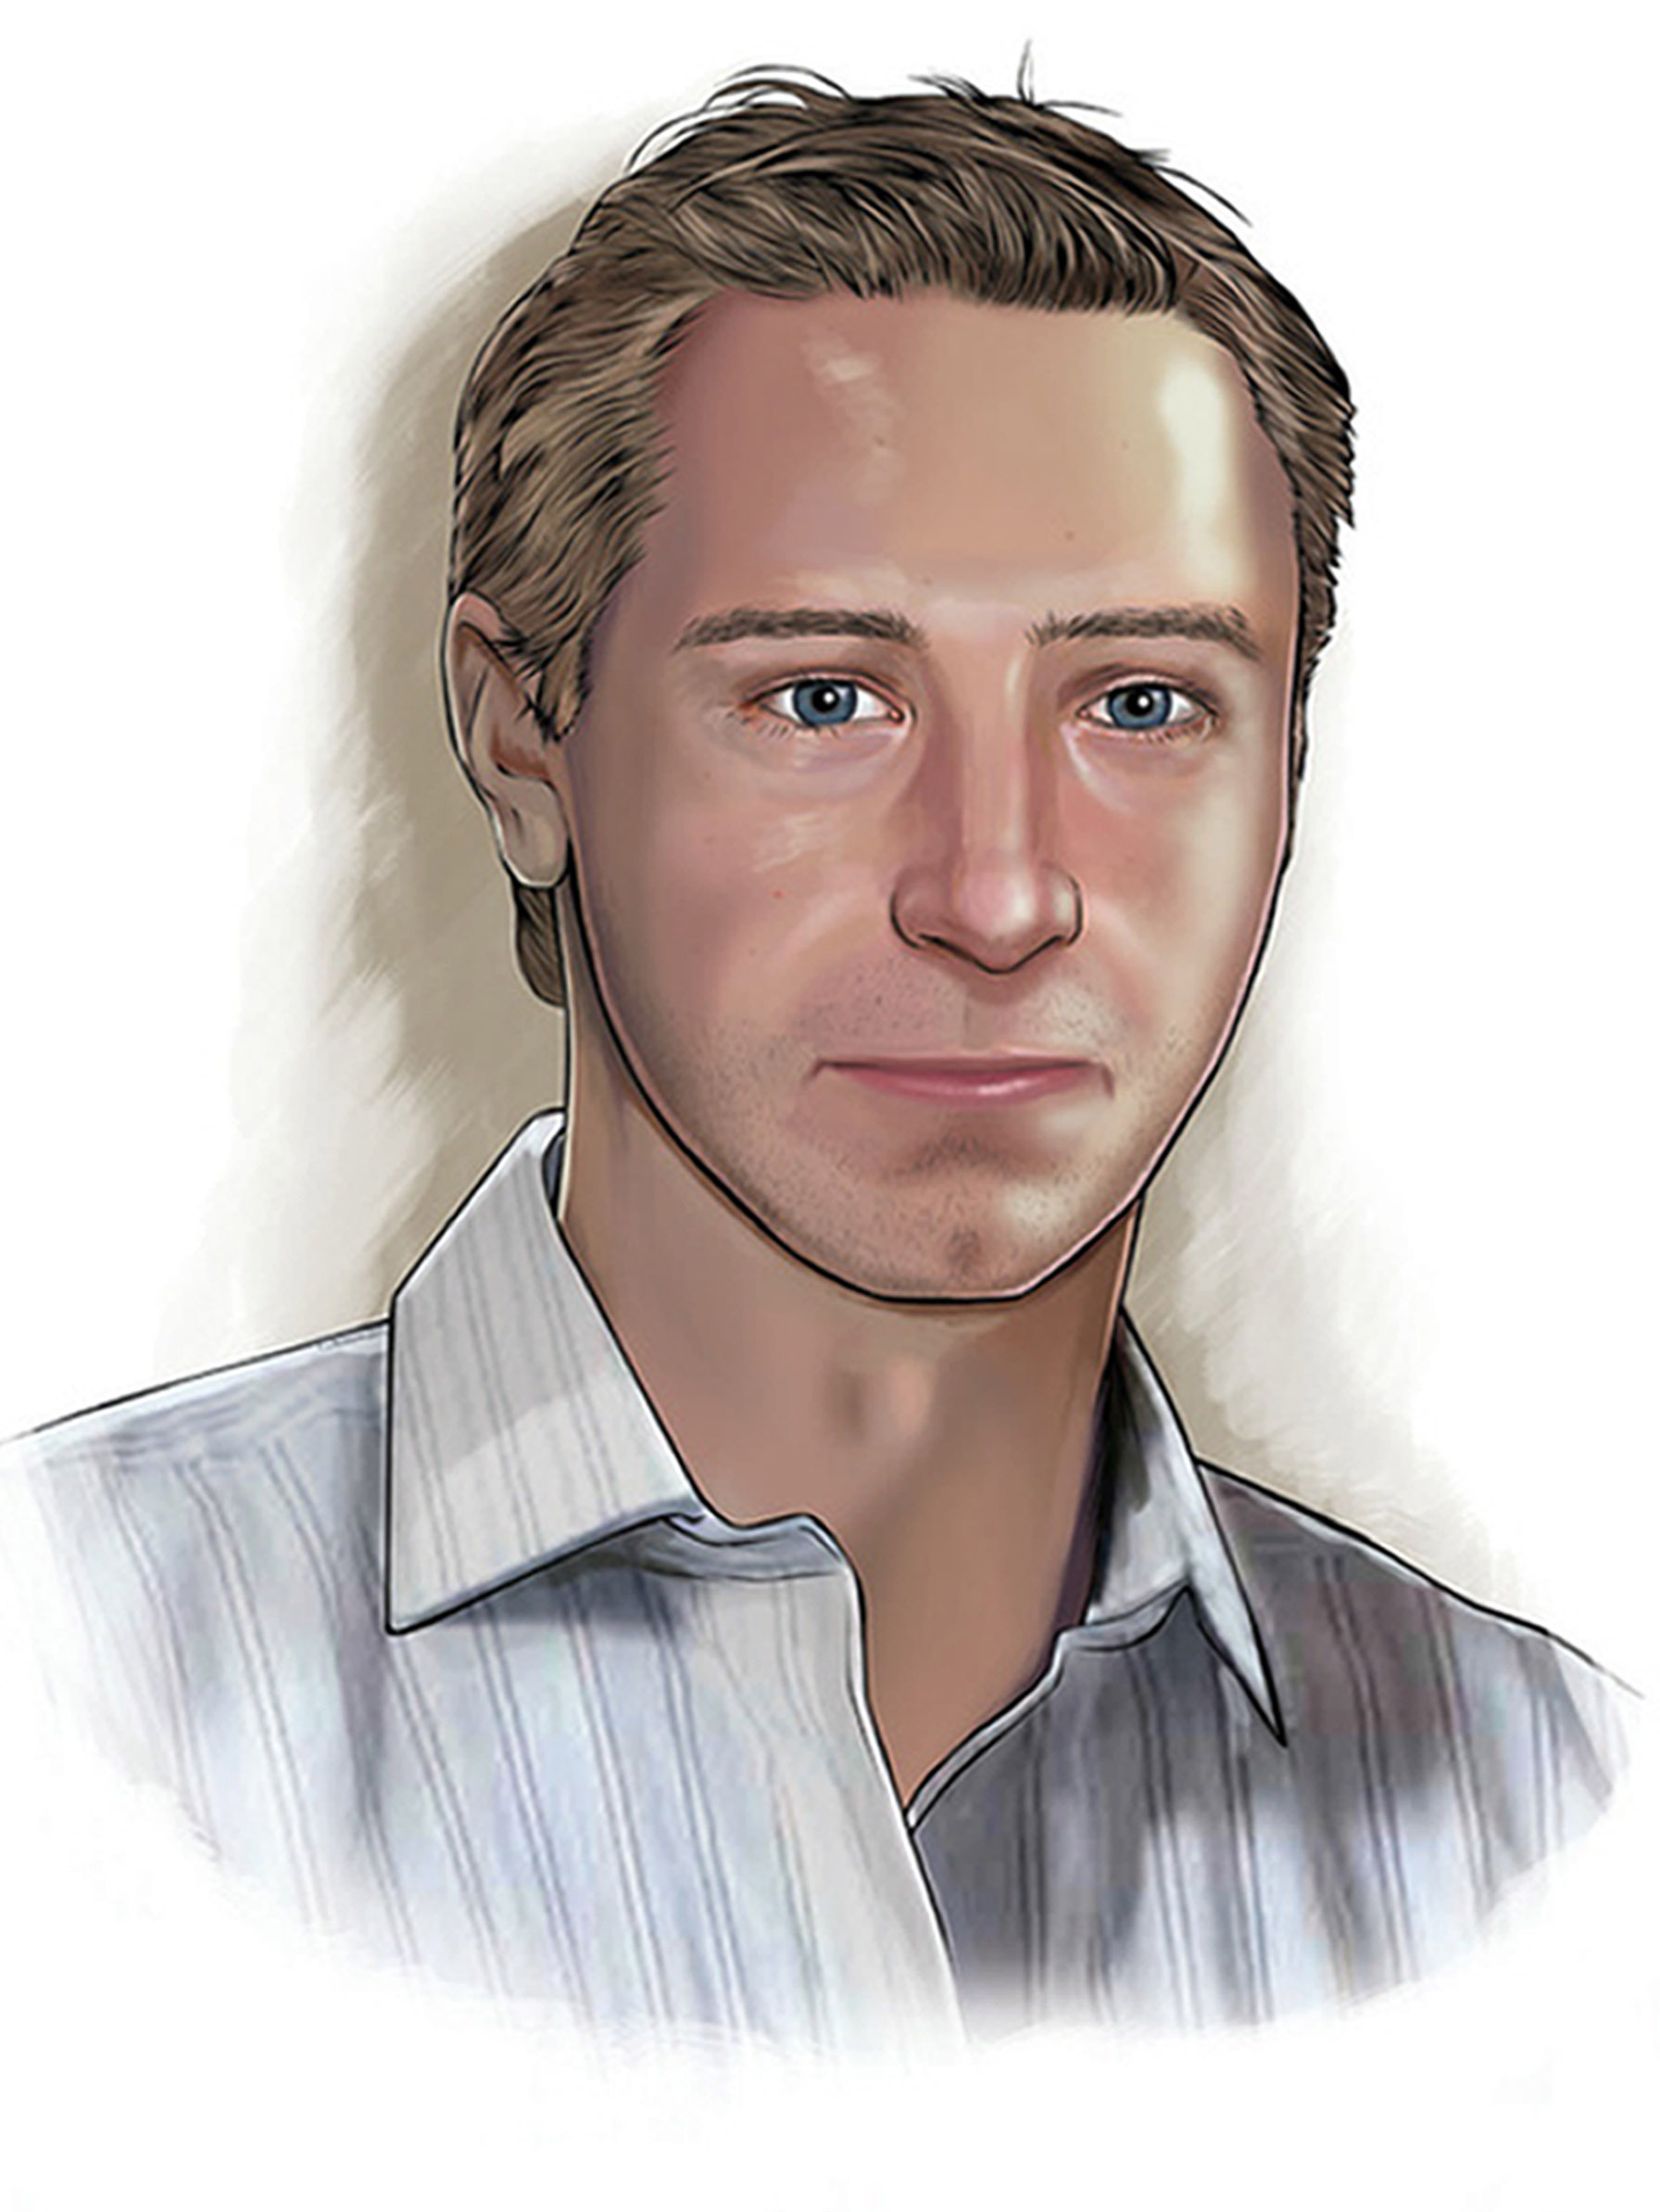 A digital portrait of how Ben may have looked in 2012